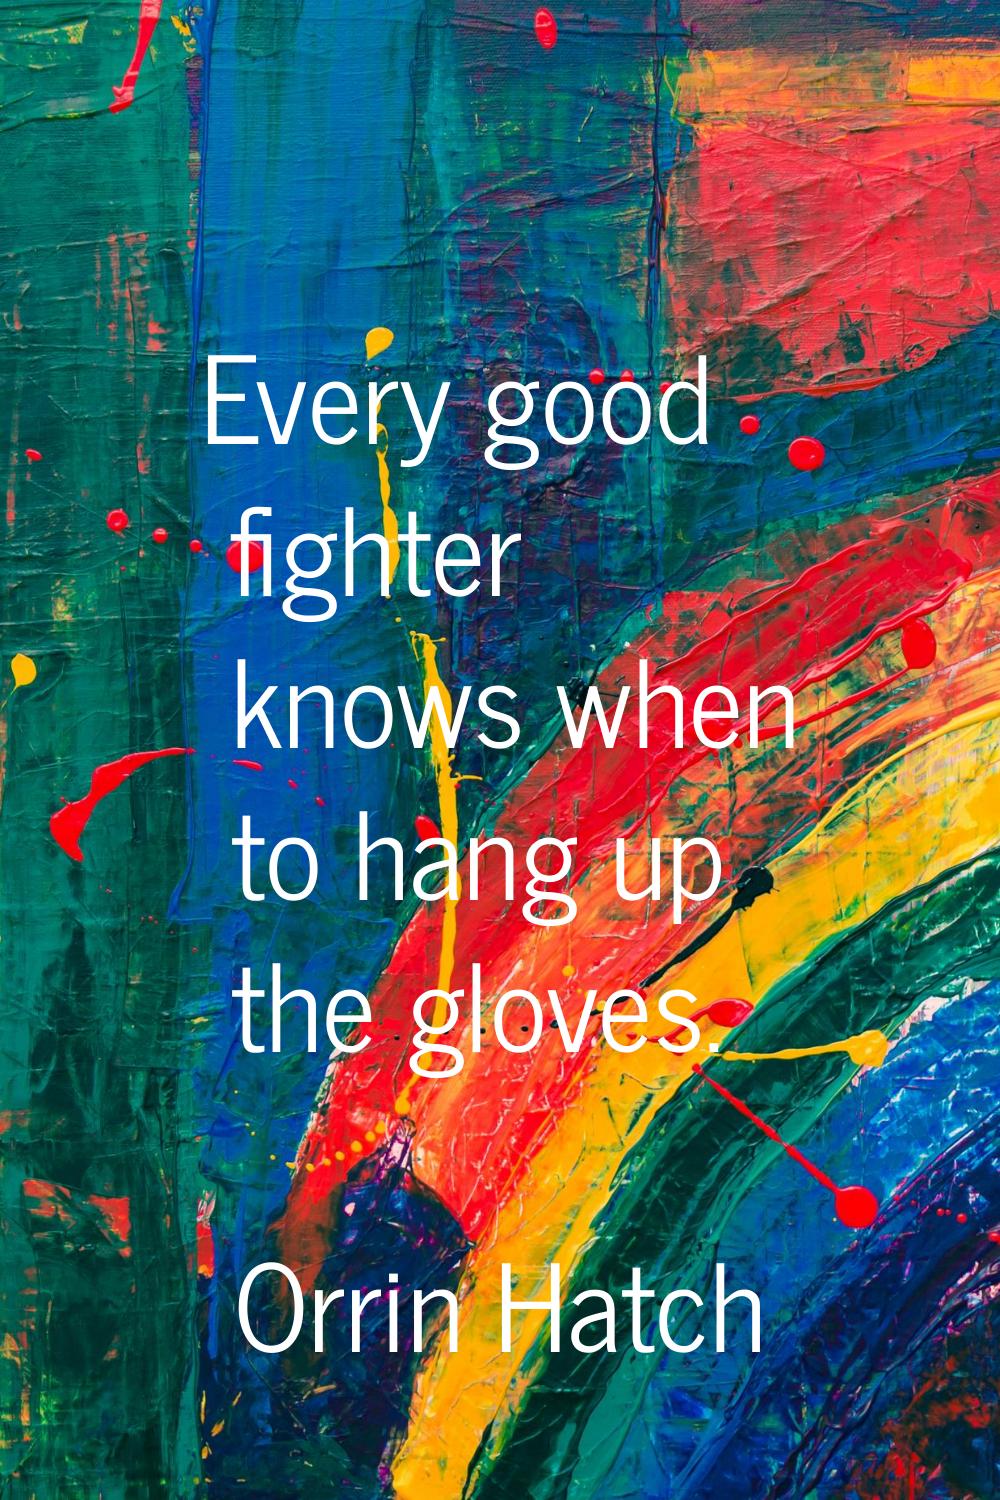 Every good fighter knows when to hang up the gloves.